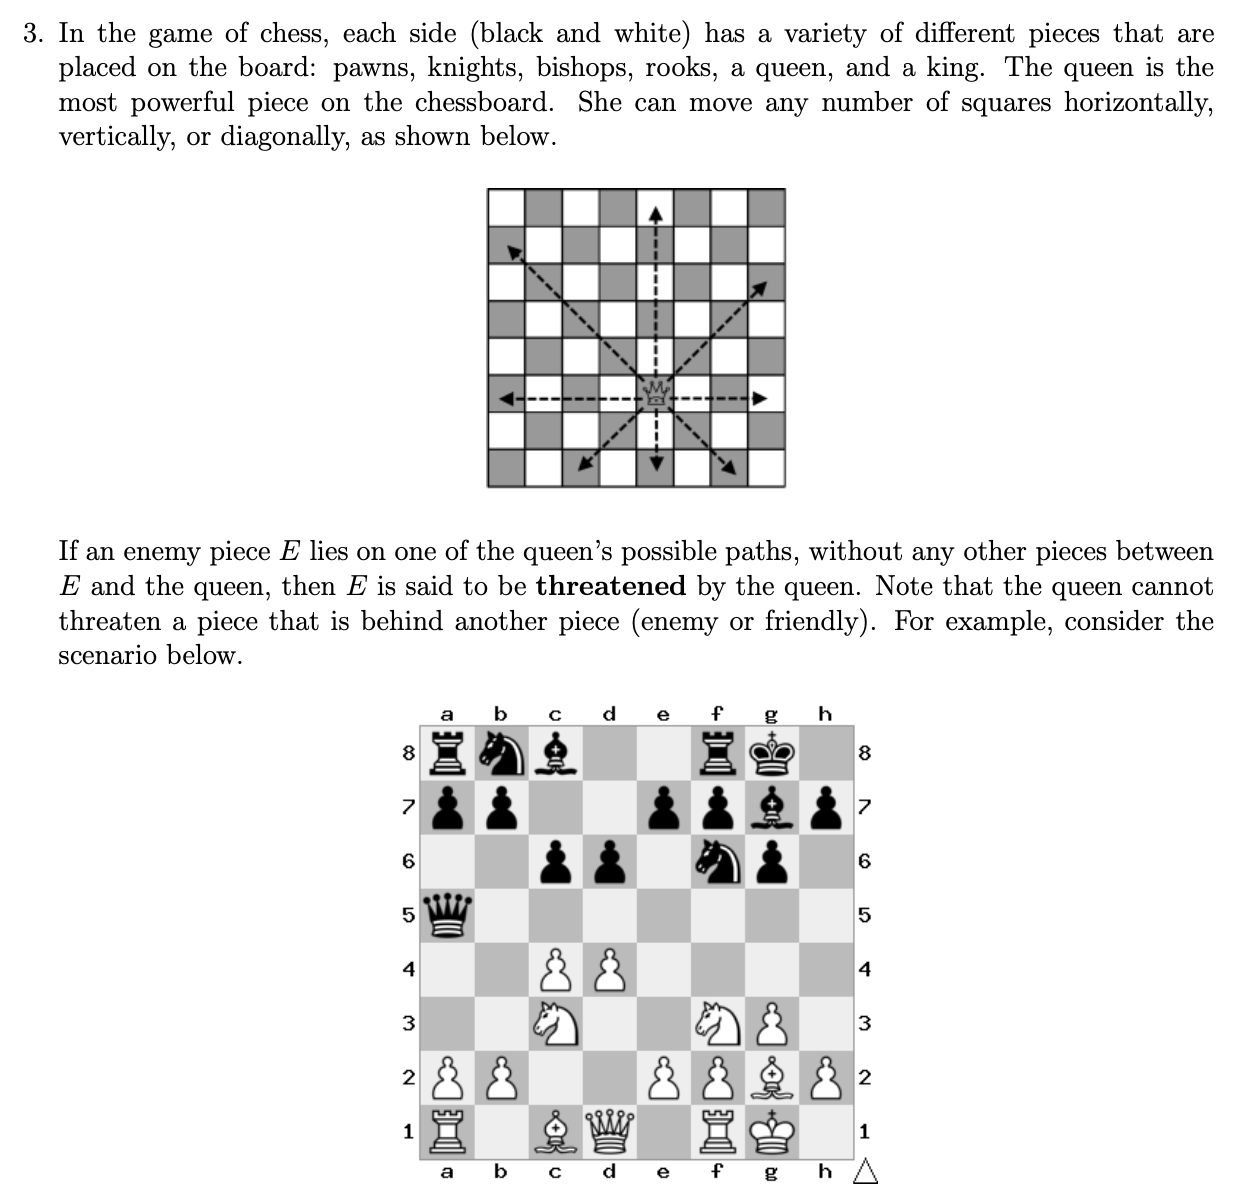 How the queen became the most powerful piece on the chessboard?